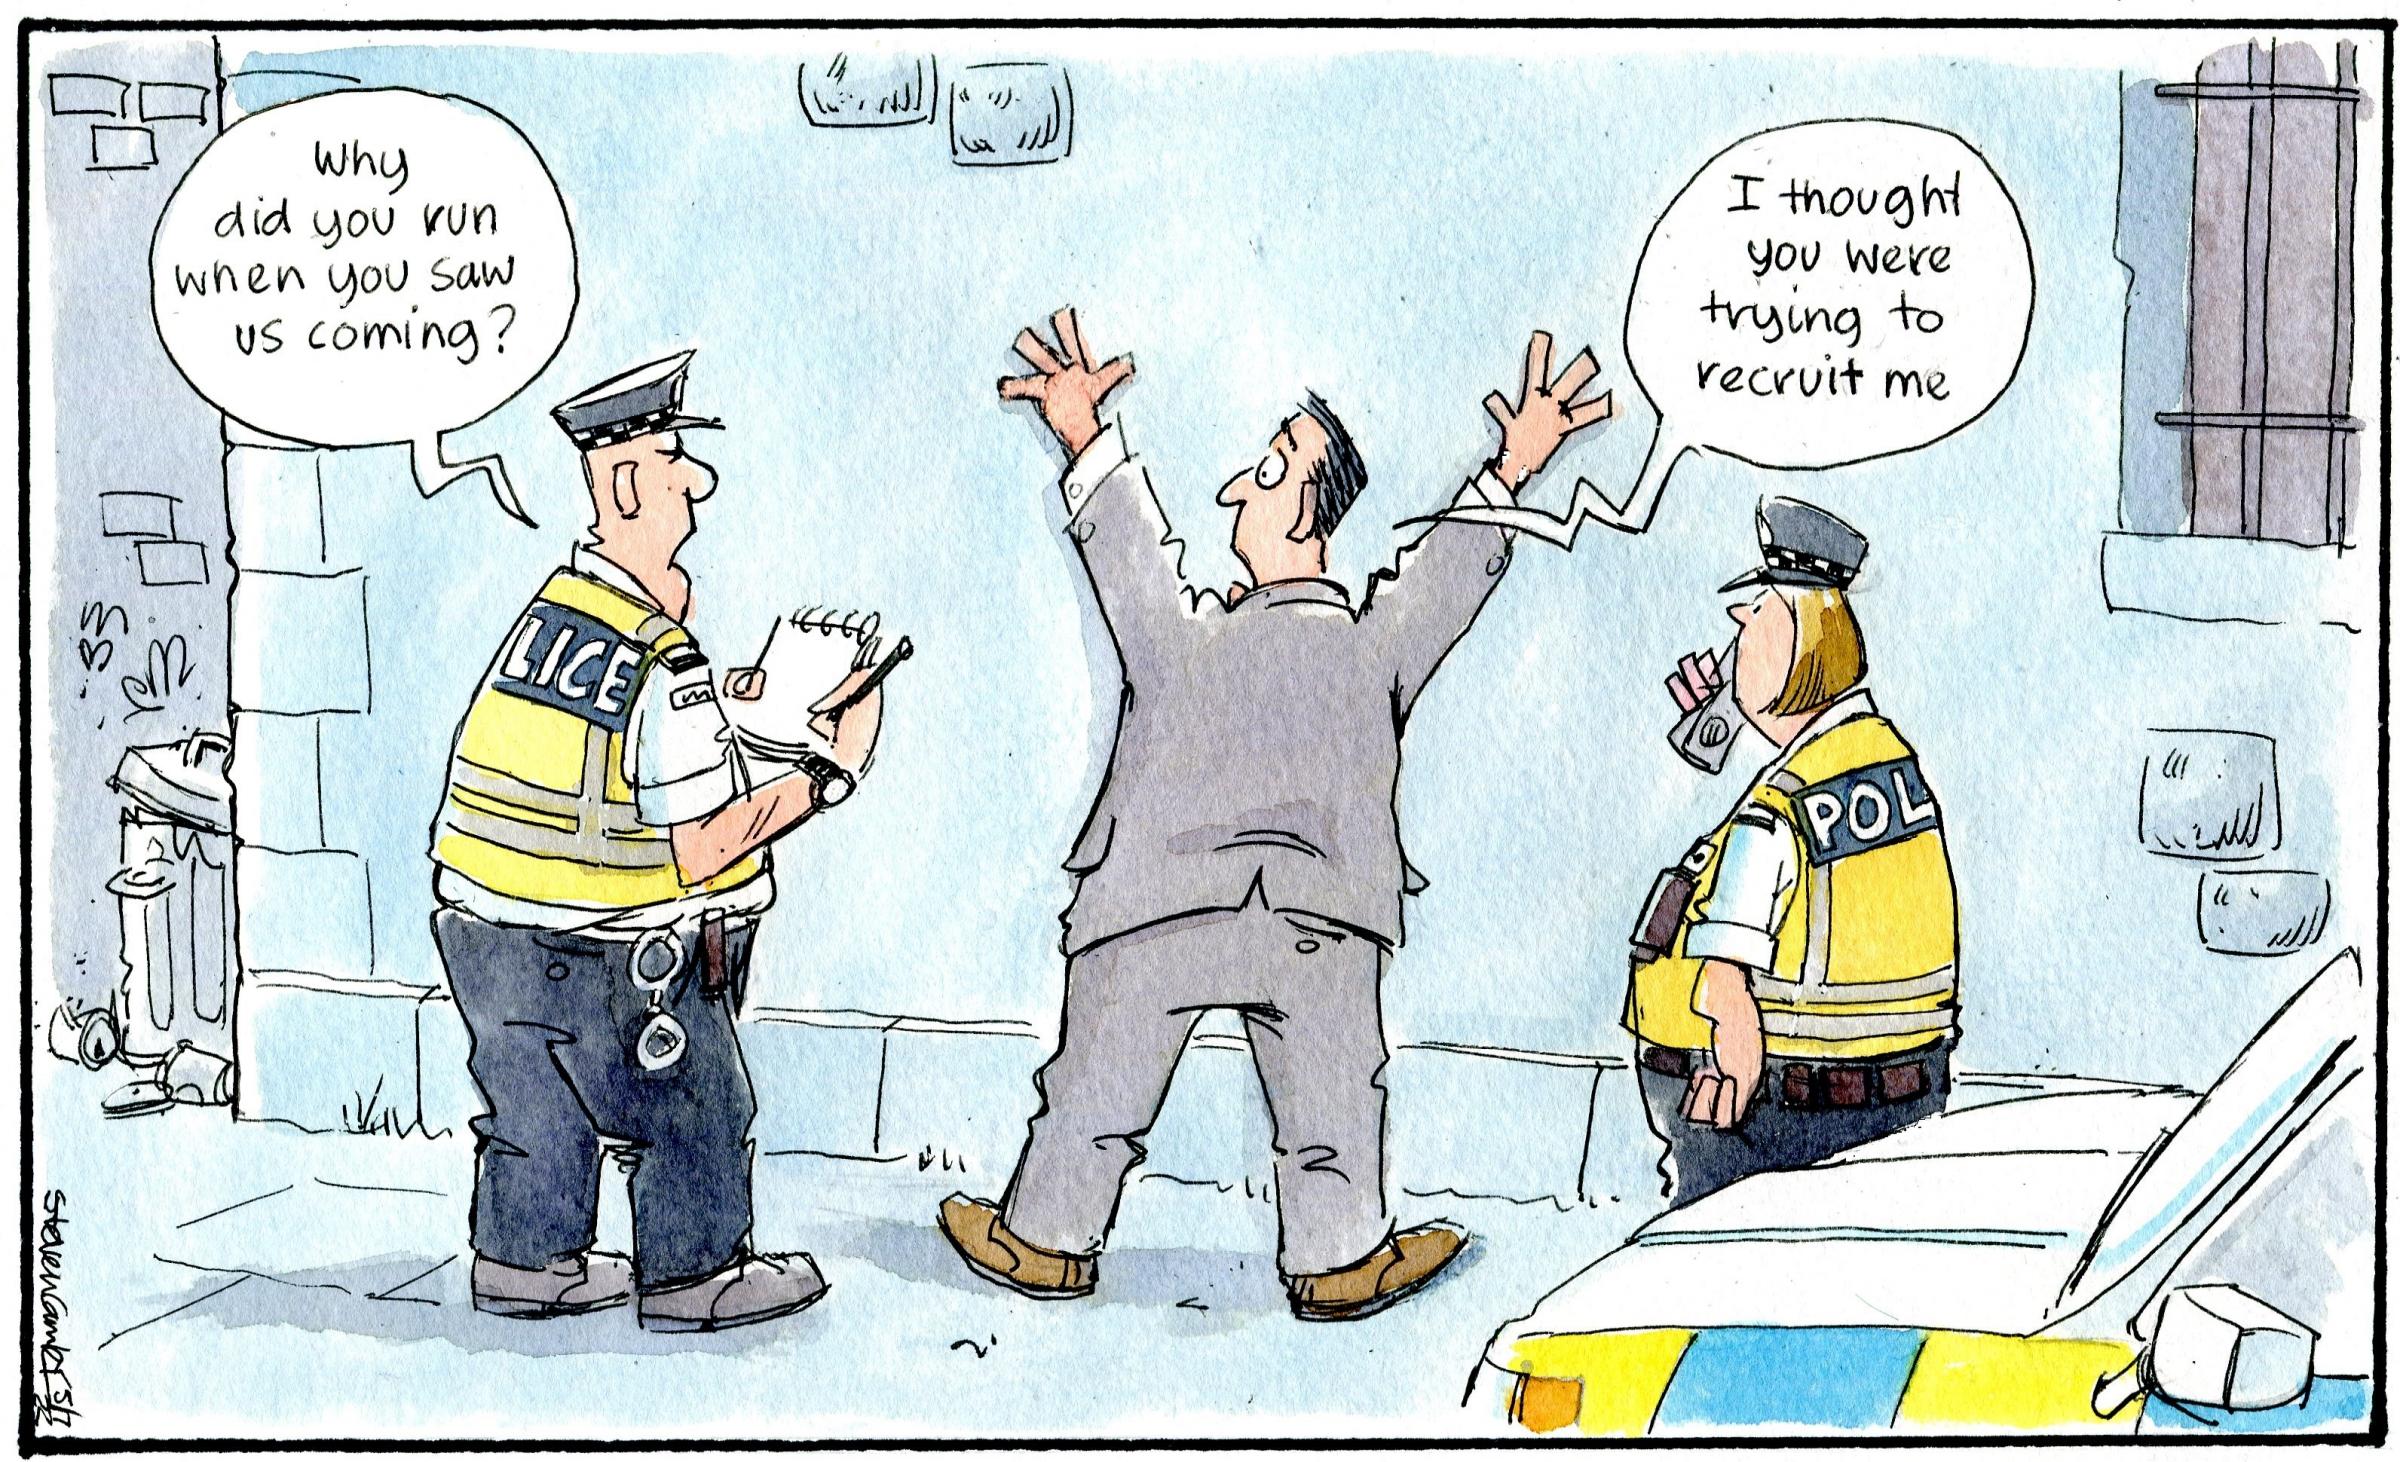 Our cartoonist Steven Camley’s take on police recruitment